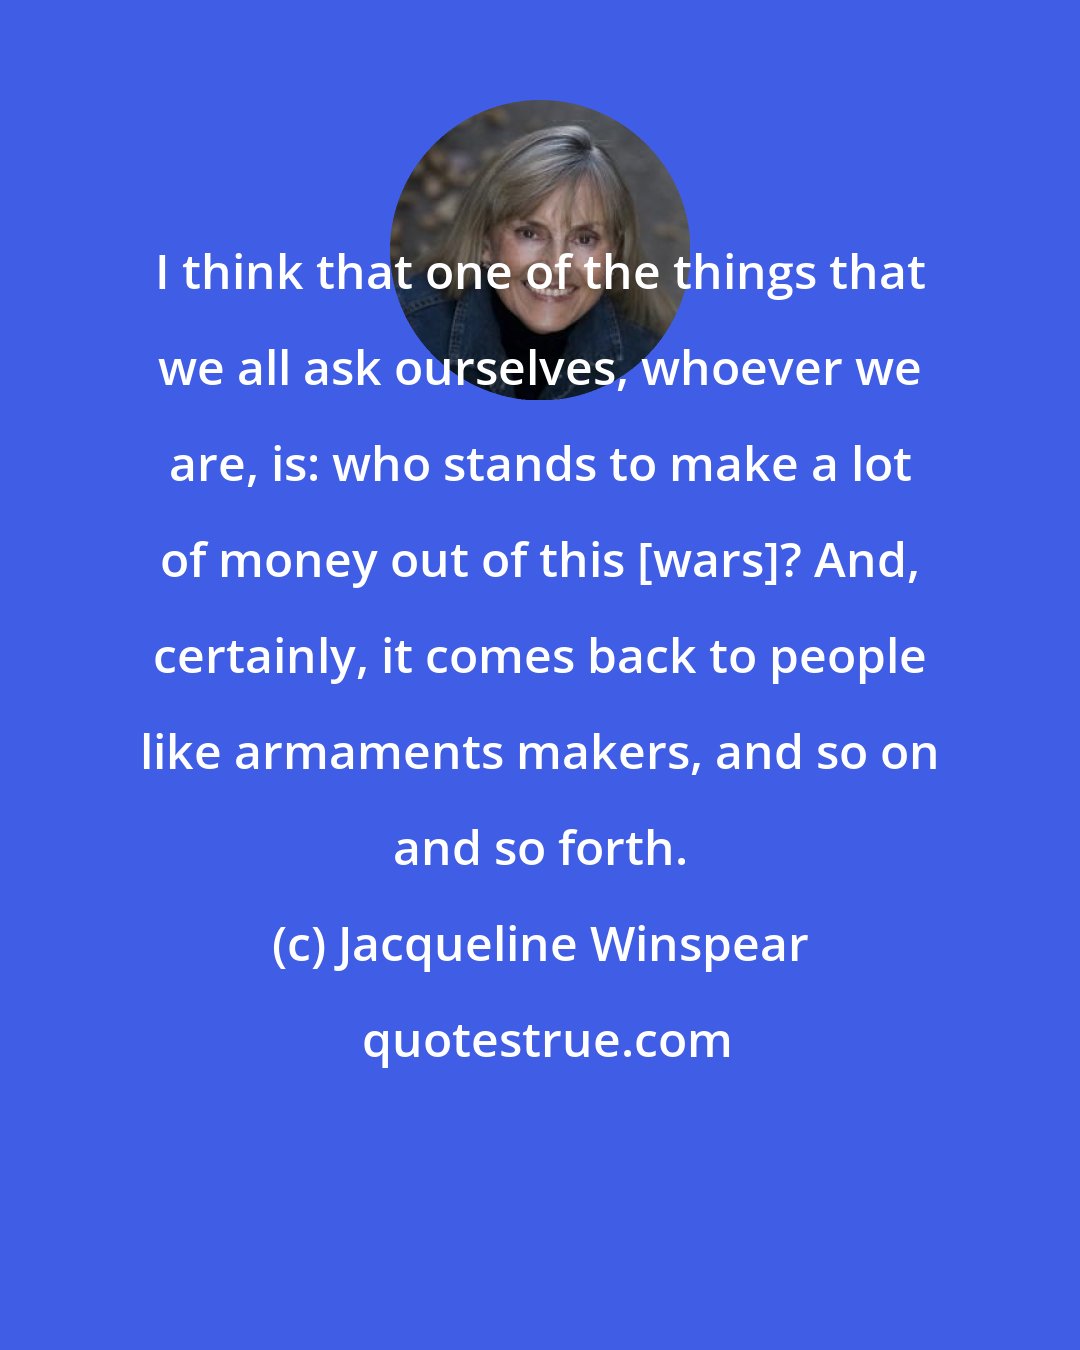 Jacqueline Winspear: I think that one of the things that we all ask ourselves, whoever we are, is: who stands to make a lot of money out of this [wars]? And, certainly, it comes back to people like armaments makers, and so on and so forth.